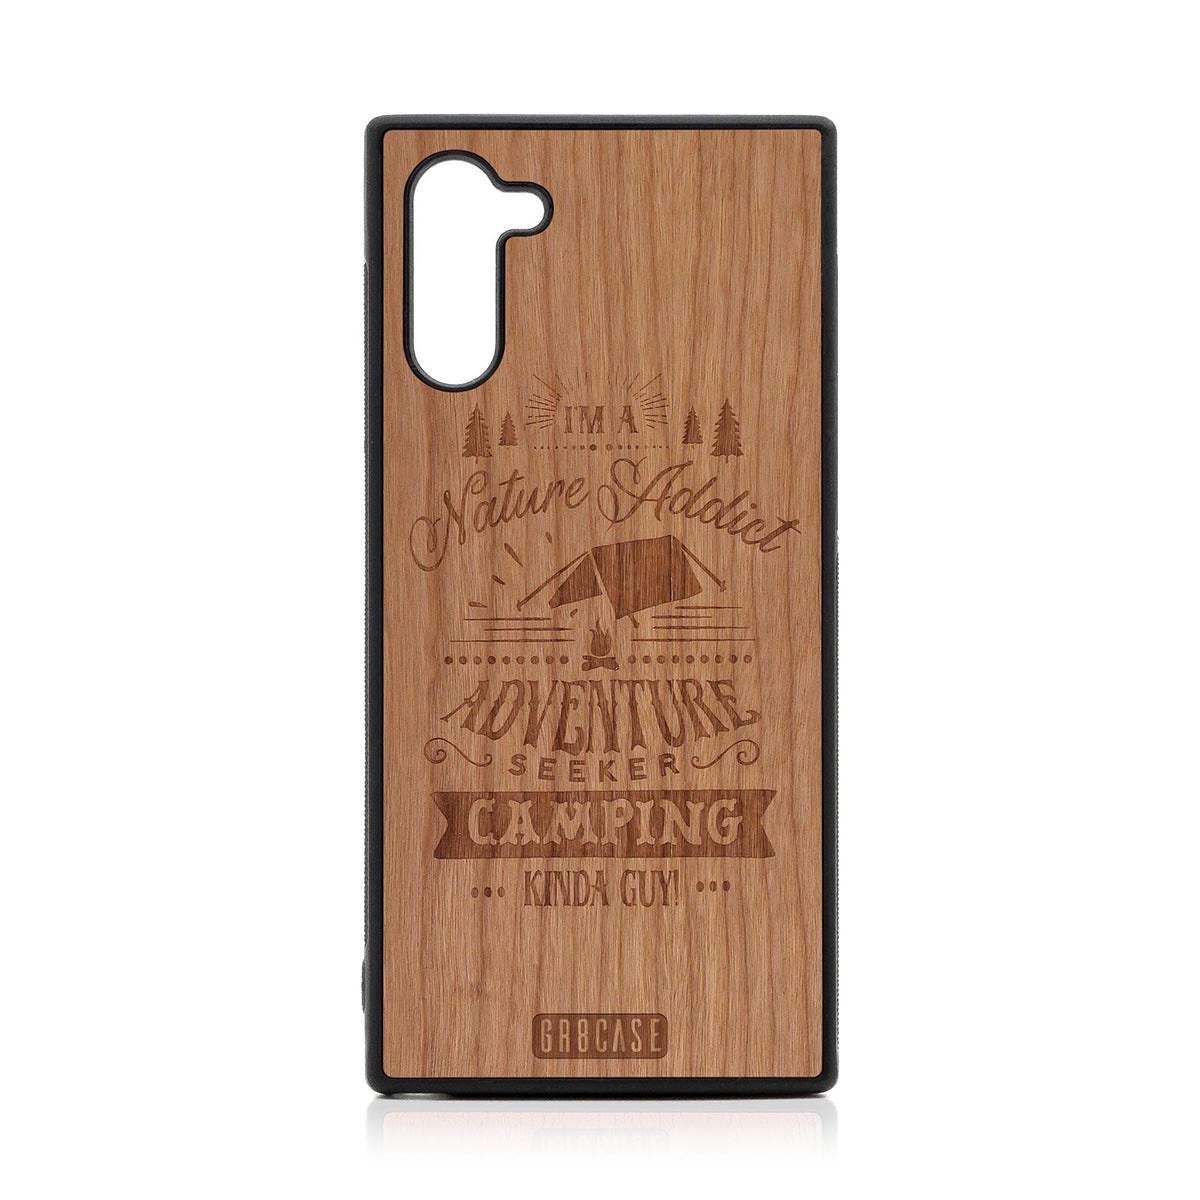 I'm A Nature Addict Adventure Seeker Camping Kinda Guy Design Wood Case Samsung Galaxy Note 10 by GR8CASE